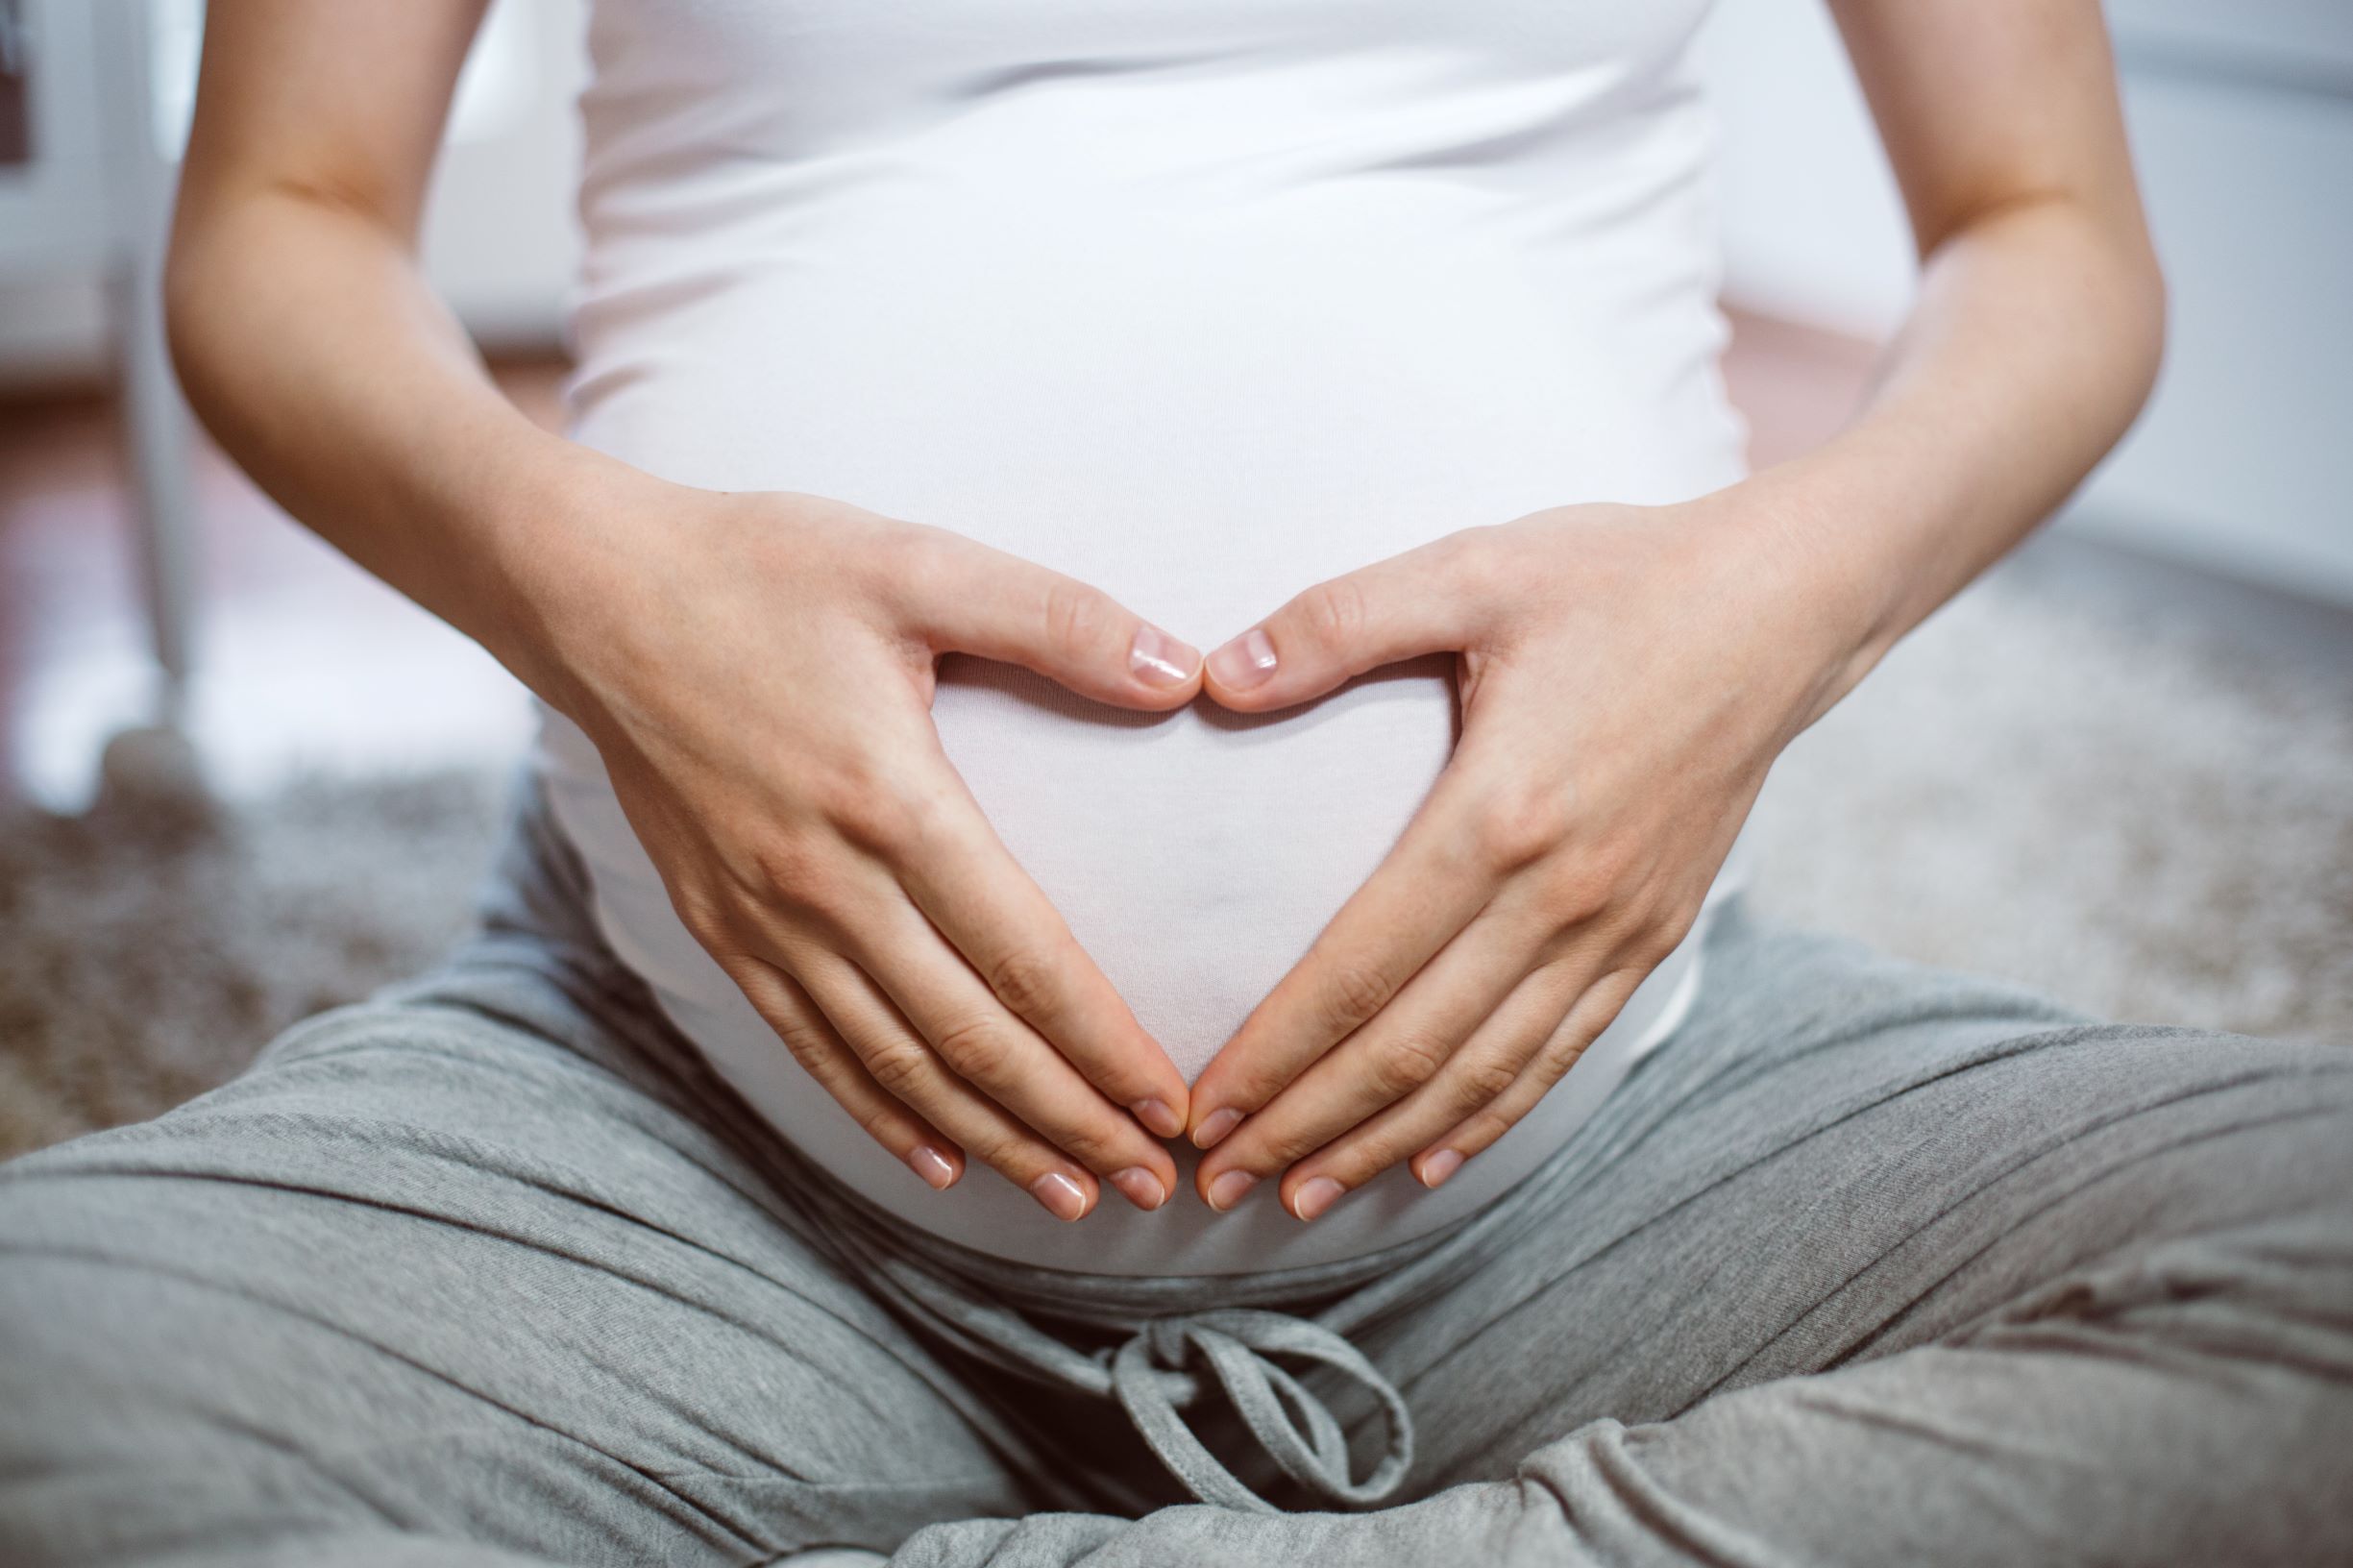 Managing heart health during pregnancy can help keep you and your baby healthy.